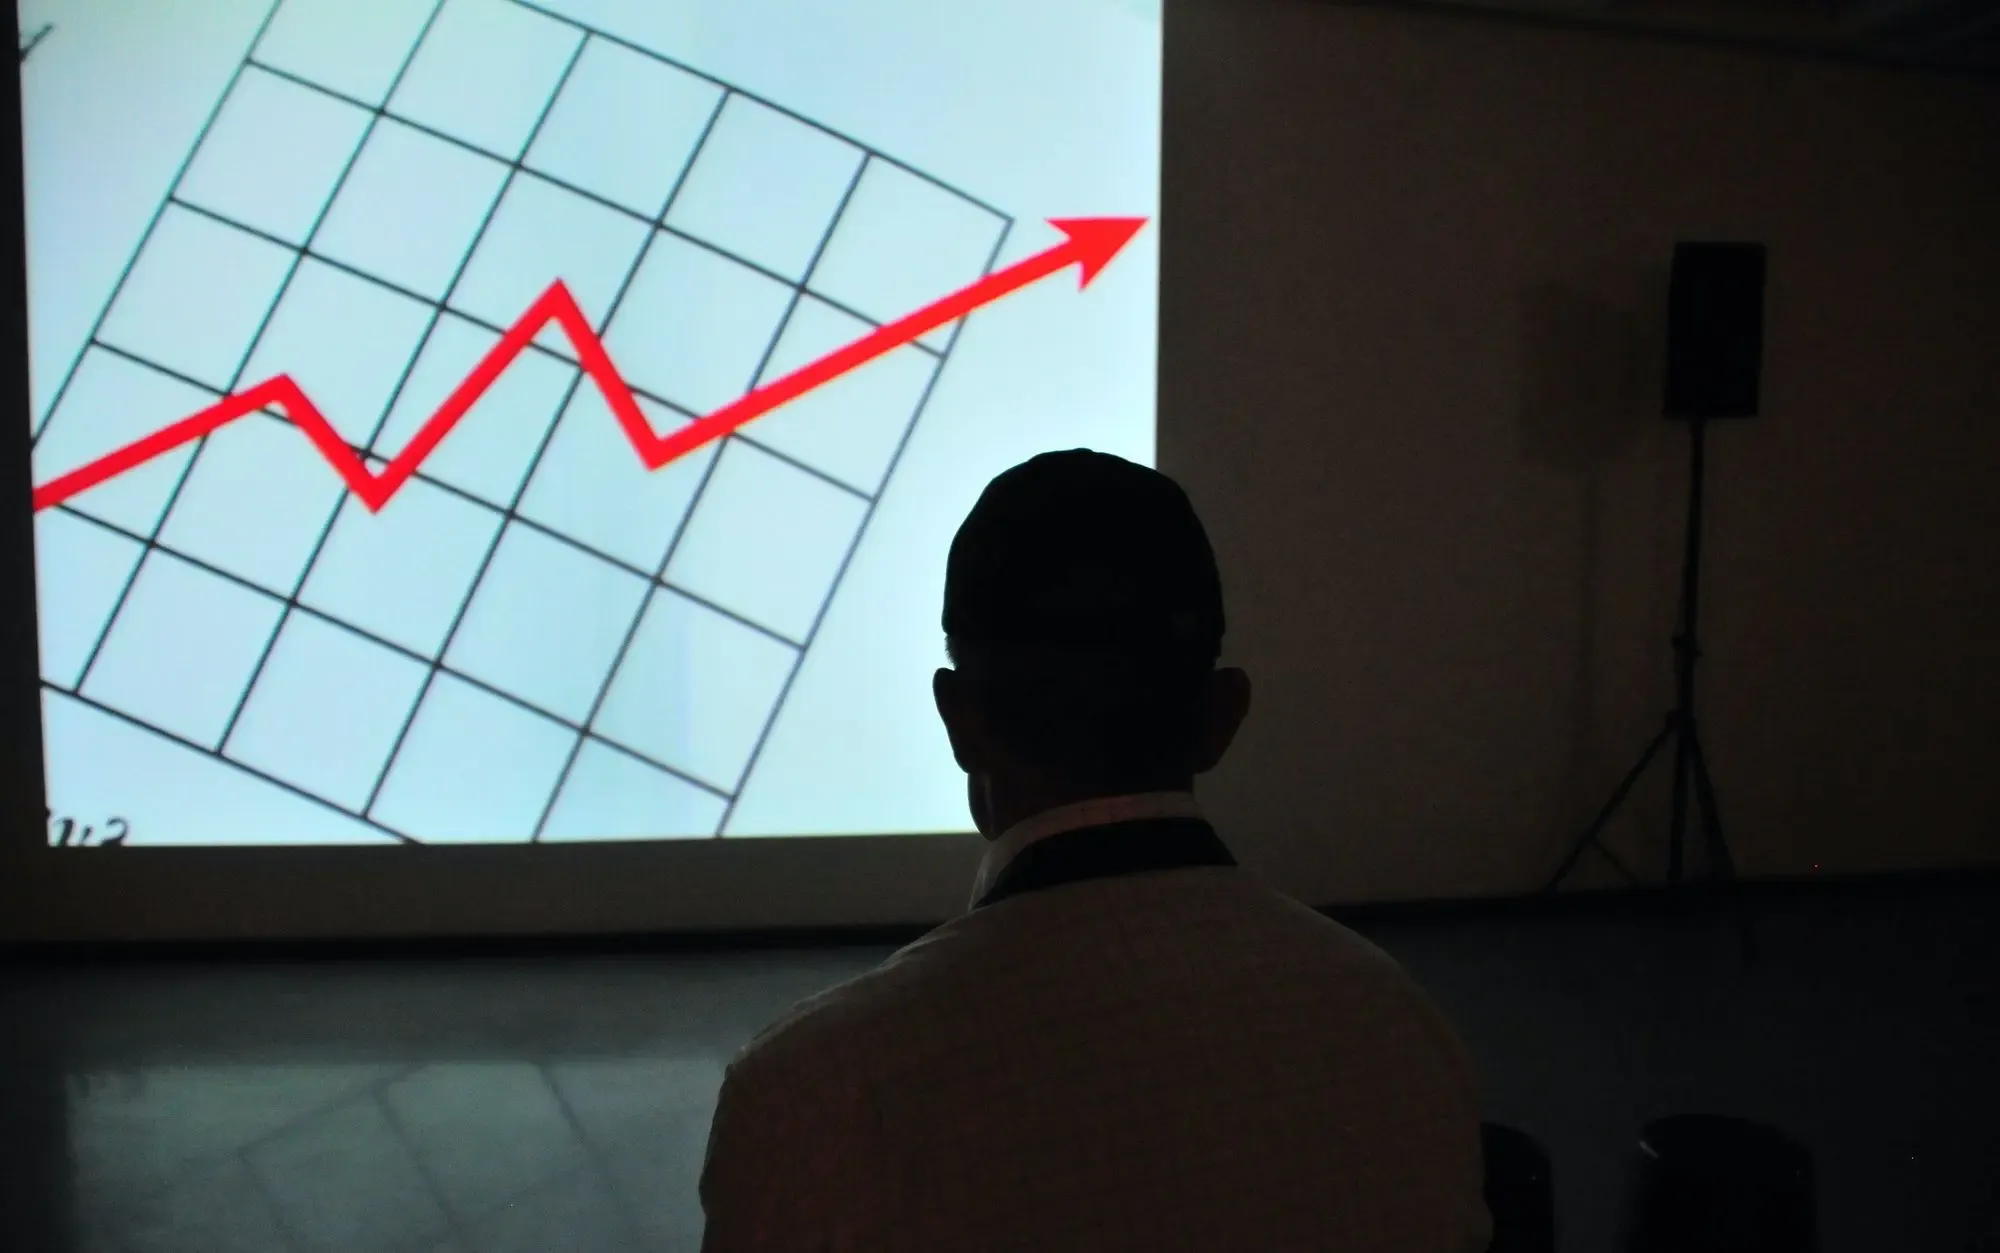 Man looking at a graph photo on projector